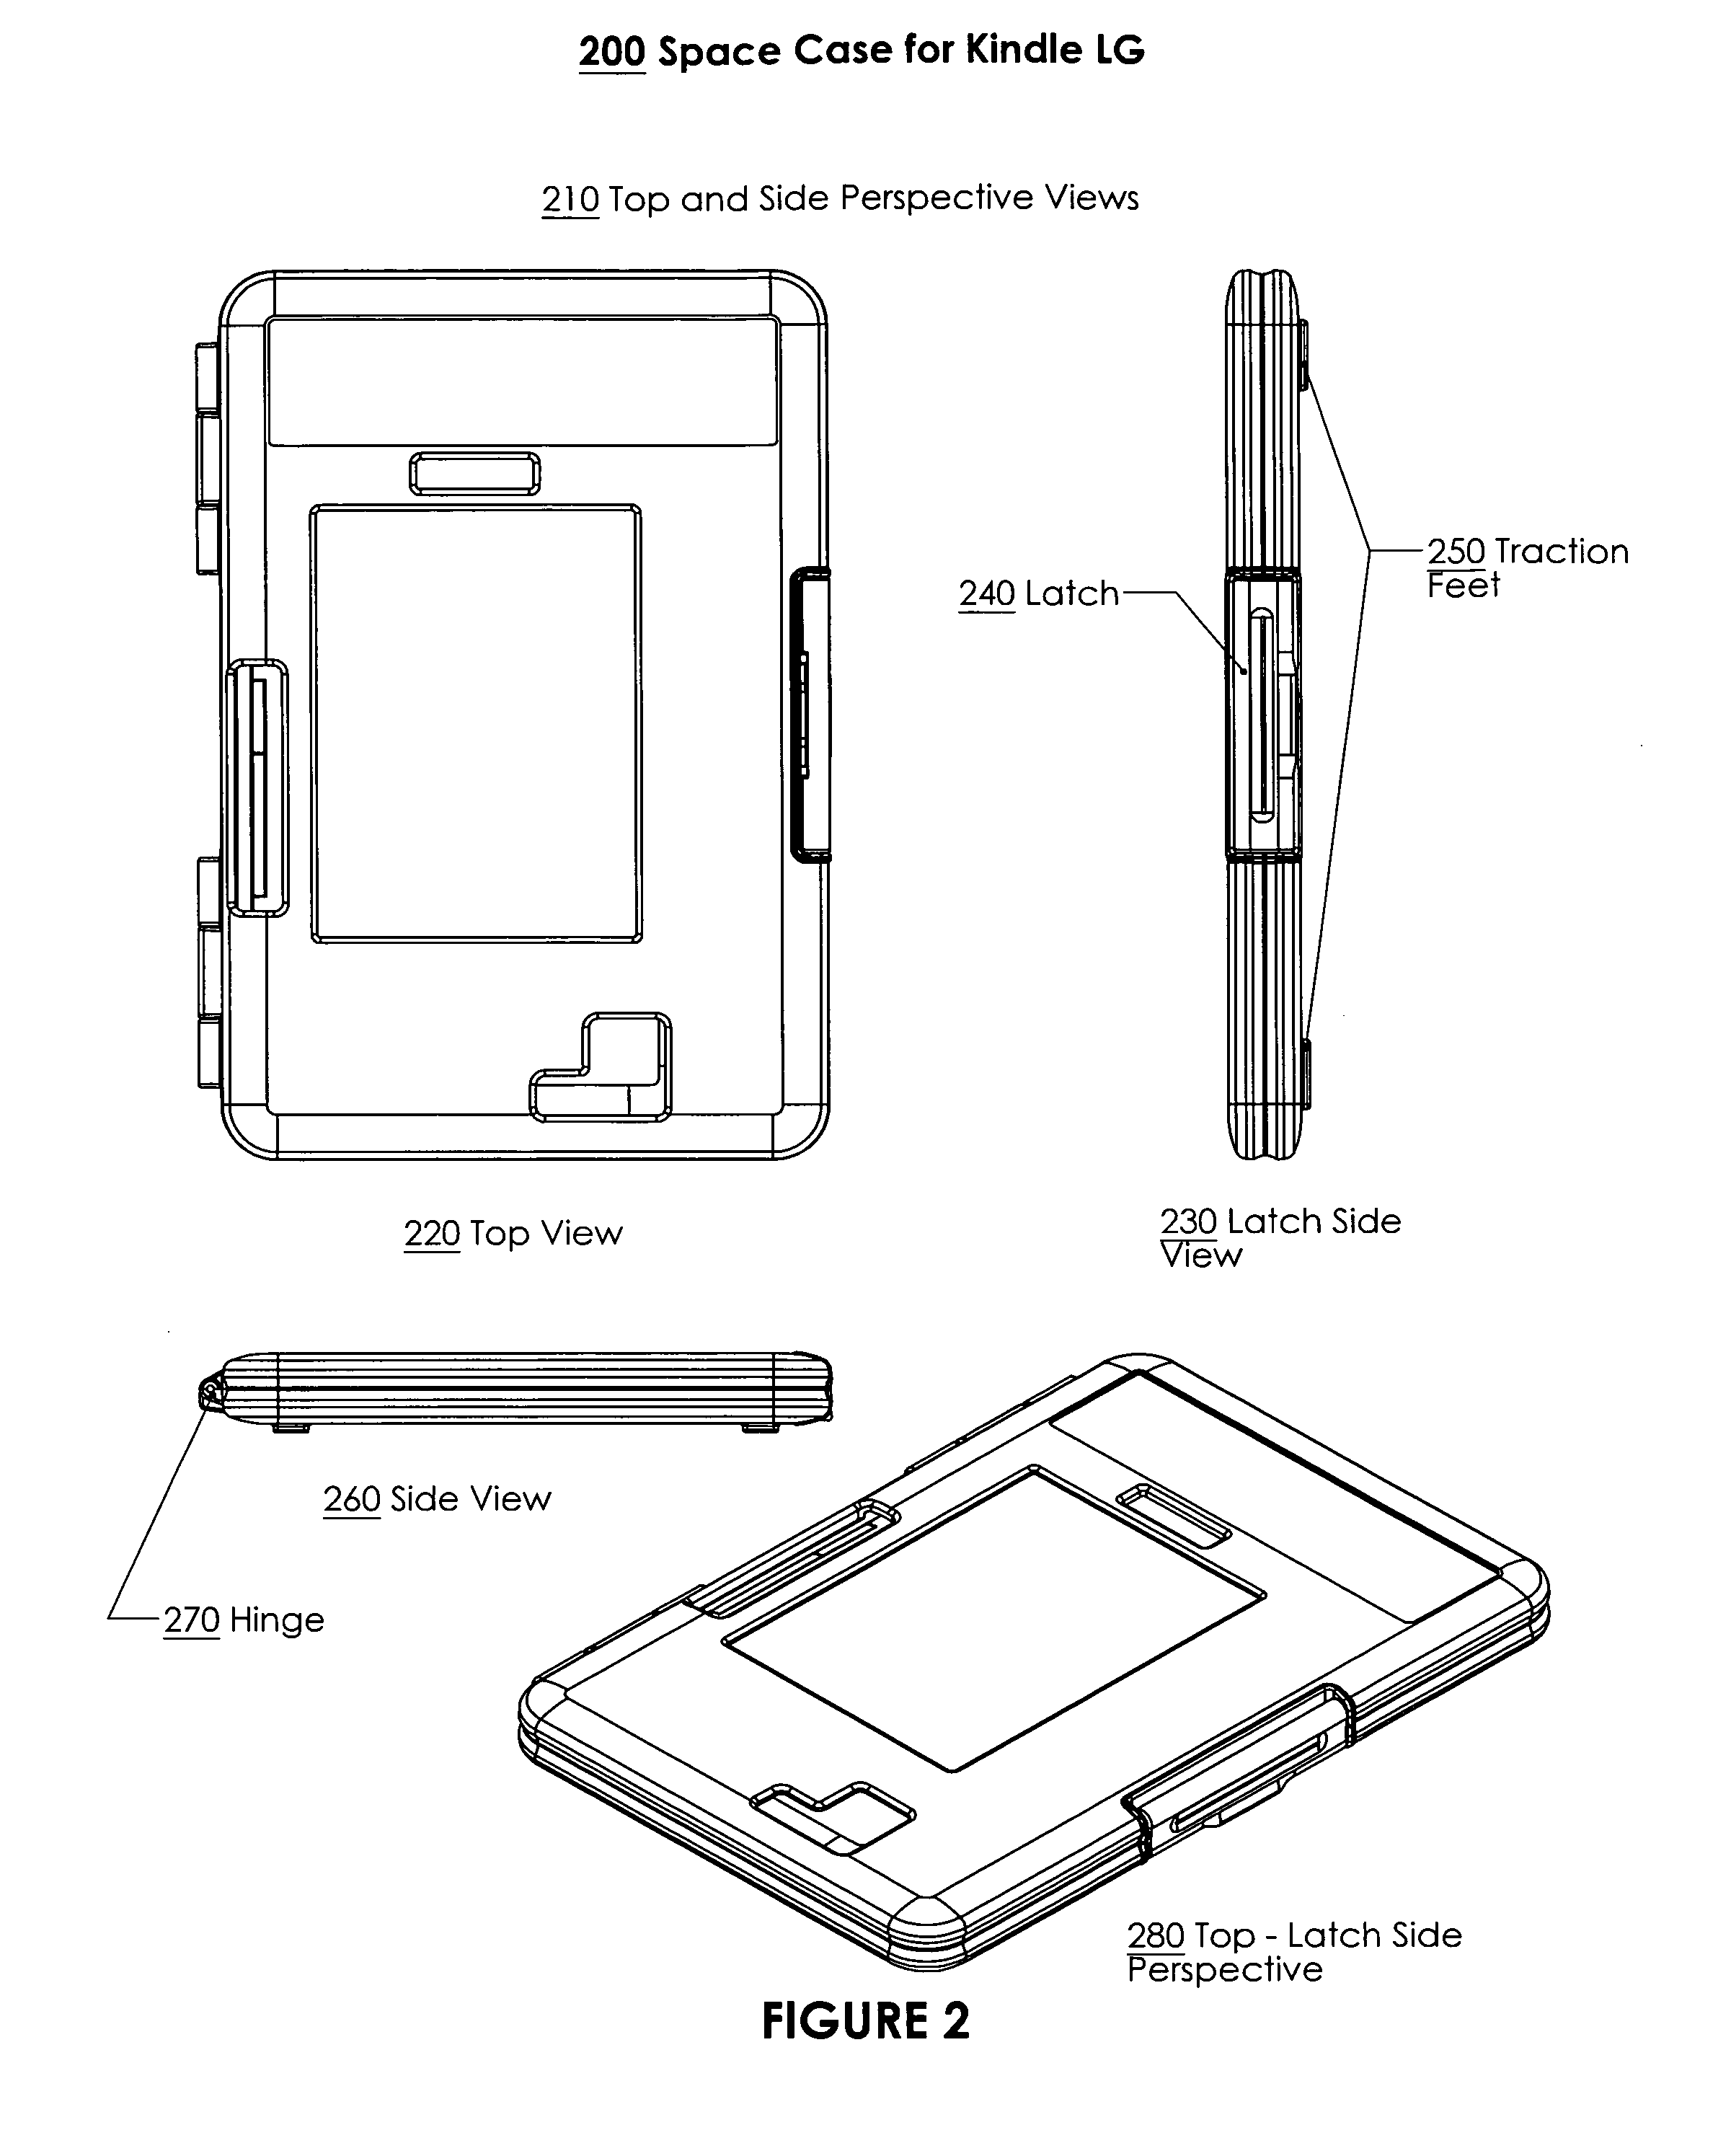 Method and apparatus for novel embodiments to repurpose eink ereaders as writing devices to enable children to write on digital workbook learning content